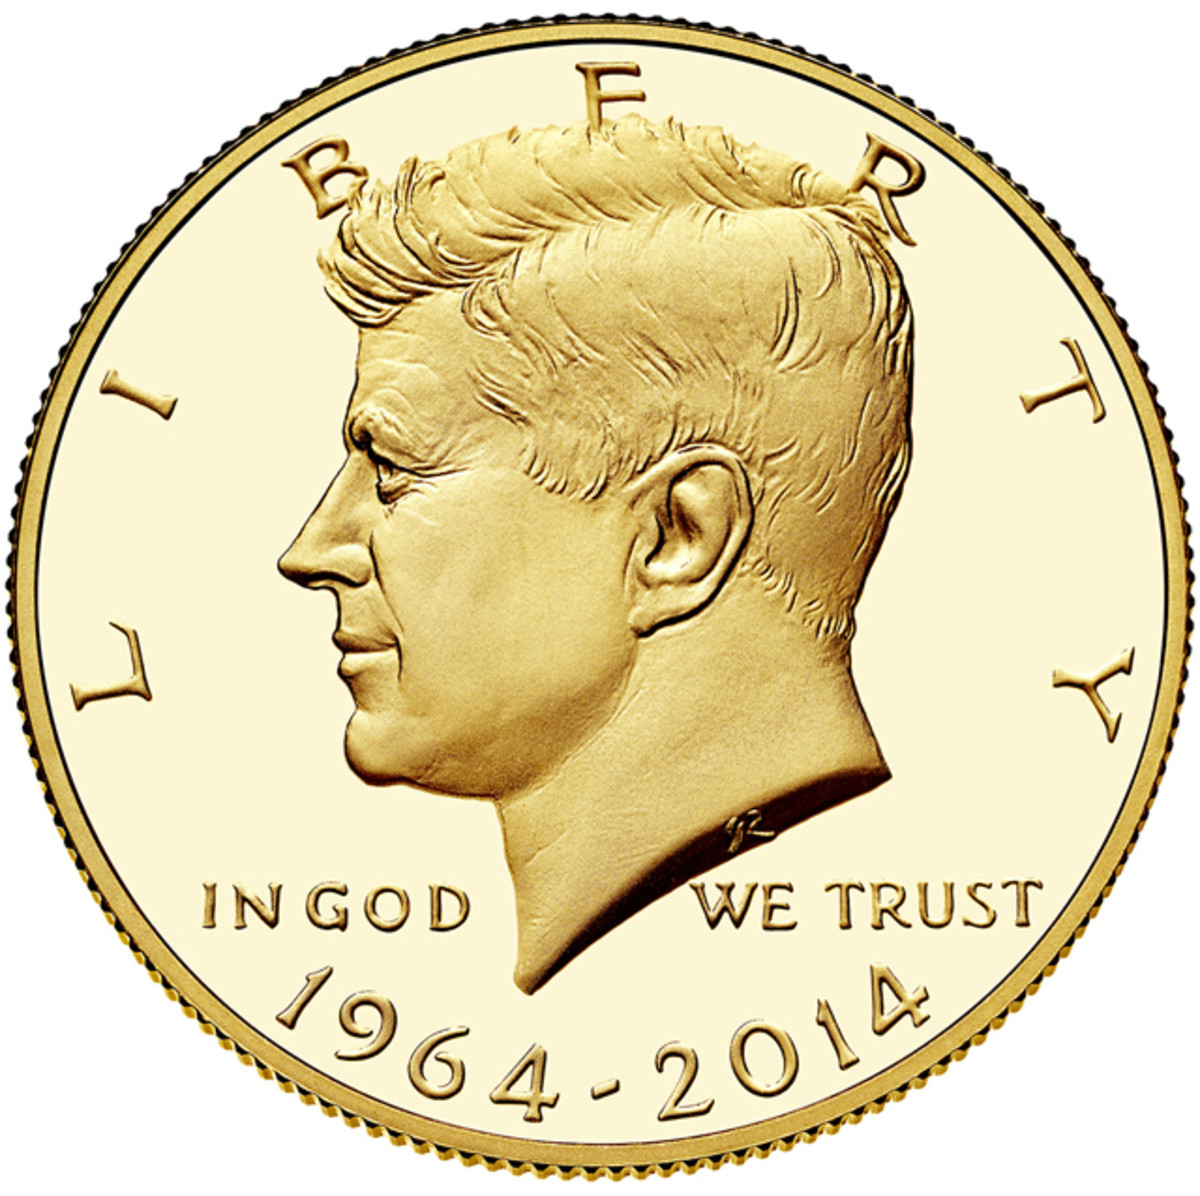 Obverse of the 2014-W Kennedy gold coin